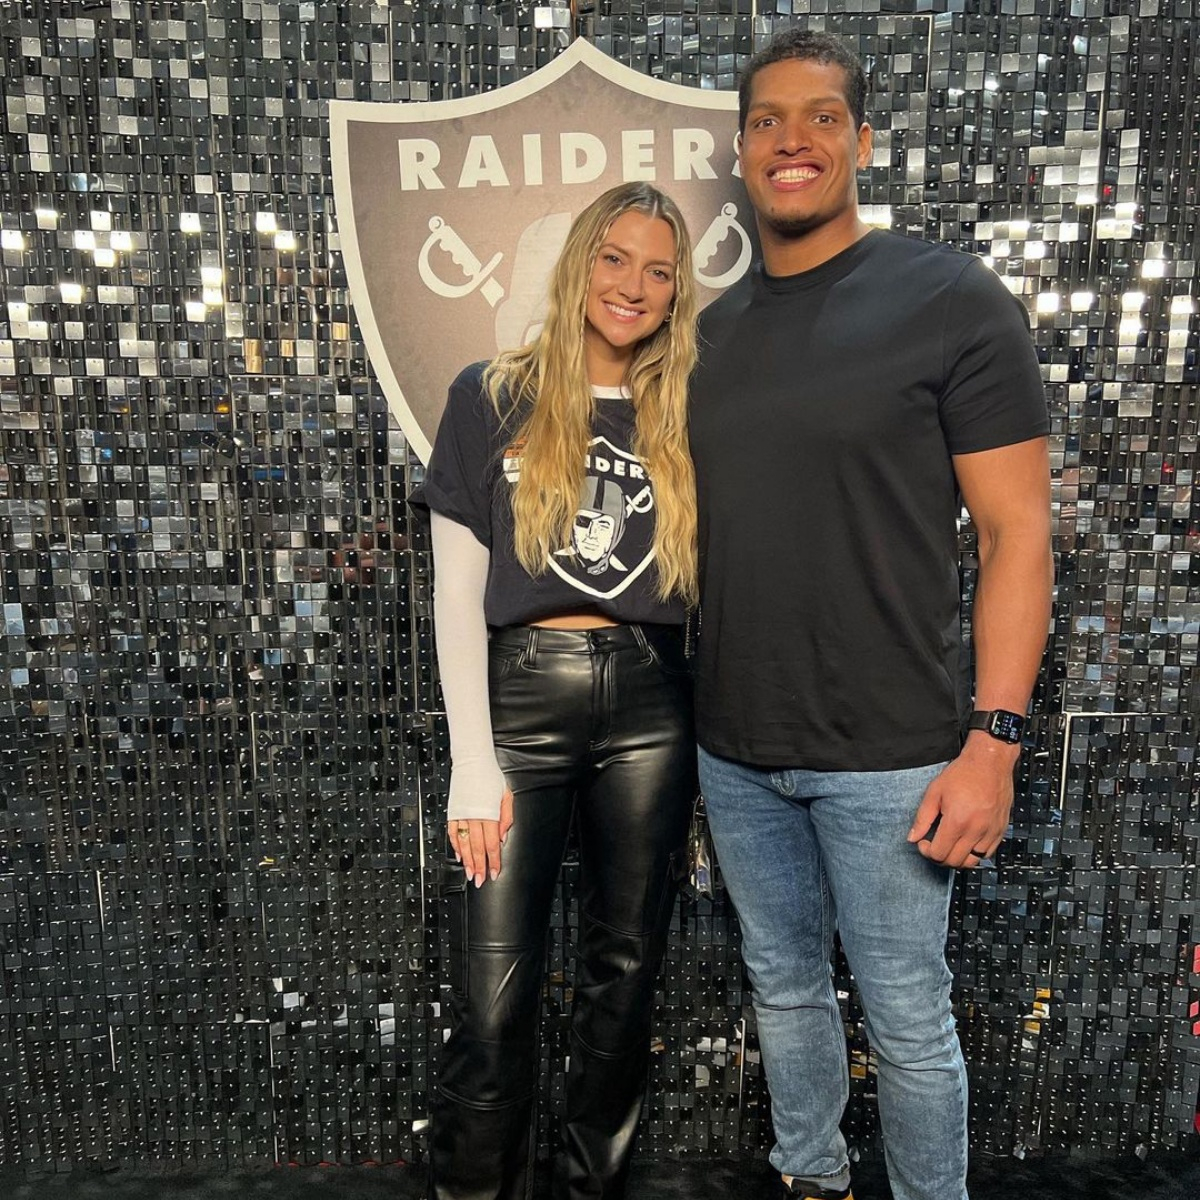 Why Allison Kuch Found the Best Teammate in NFL Player Isaac Rochell